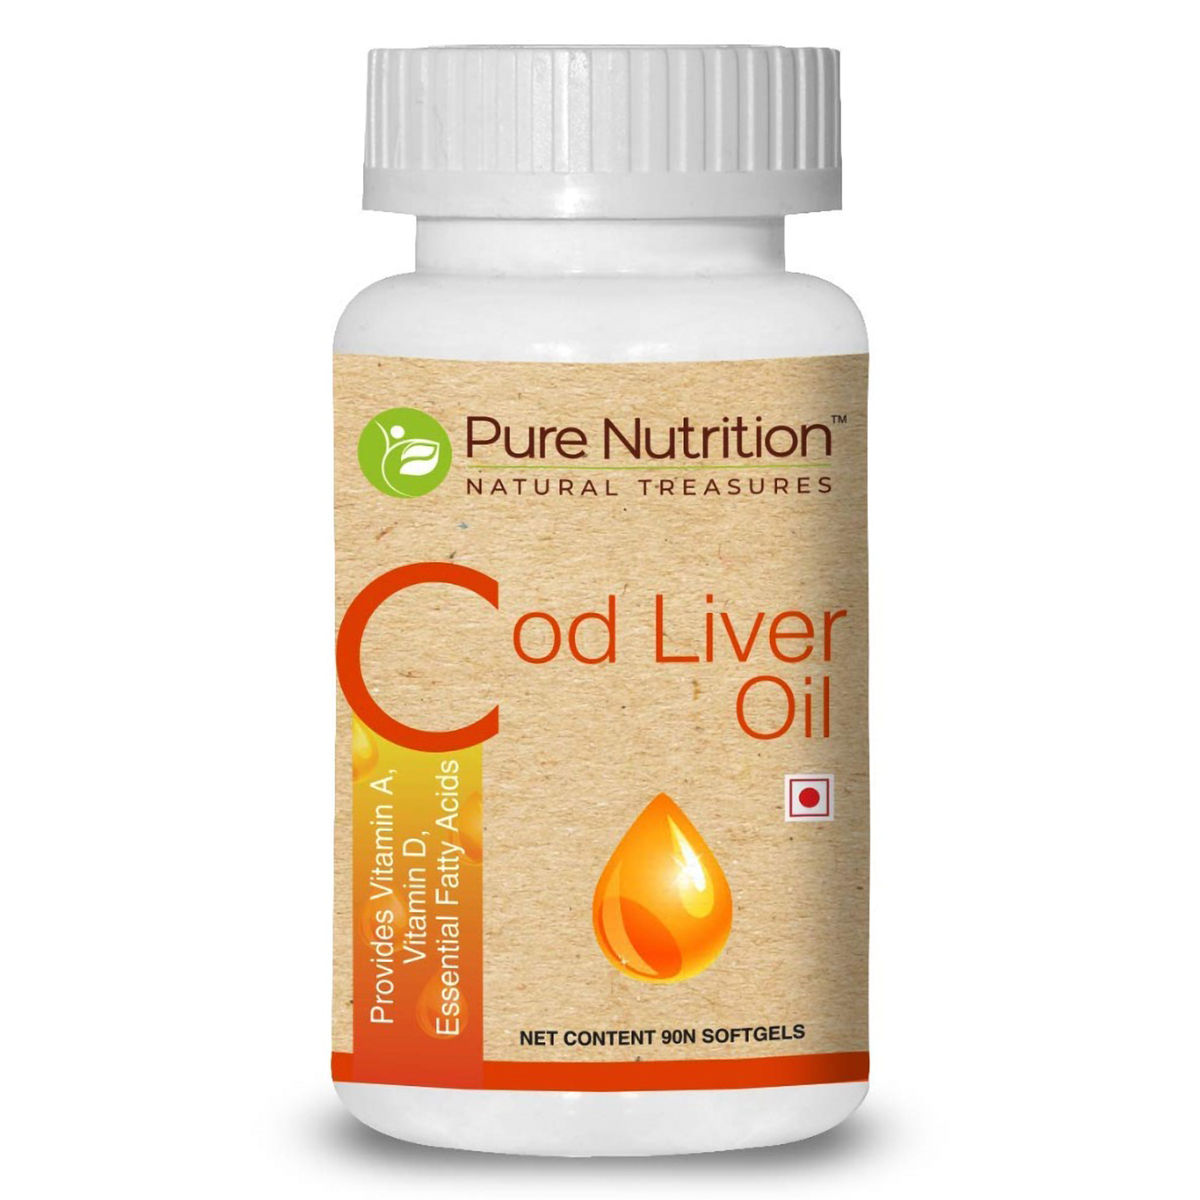 Buy Pure Nutrition Cod Liver Oil, 90 Capsules Online